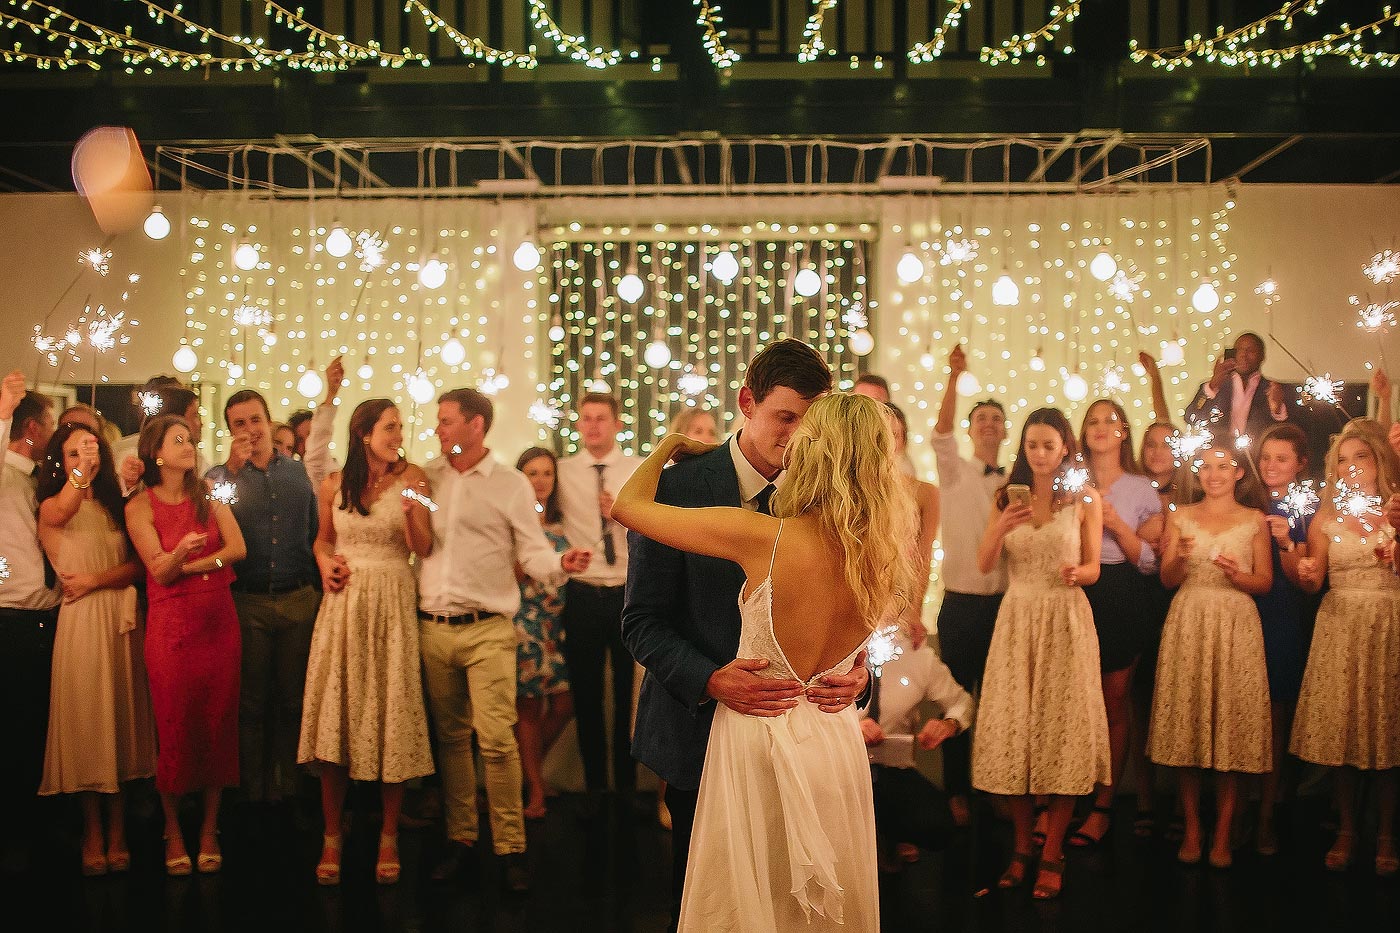 Elegant wedding first dance with fairy lights in Plettenberg Bay South Africa.